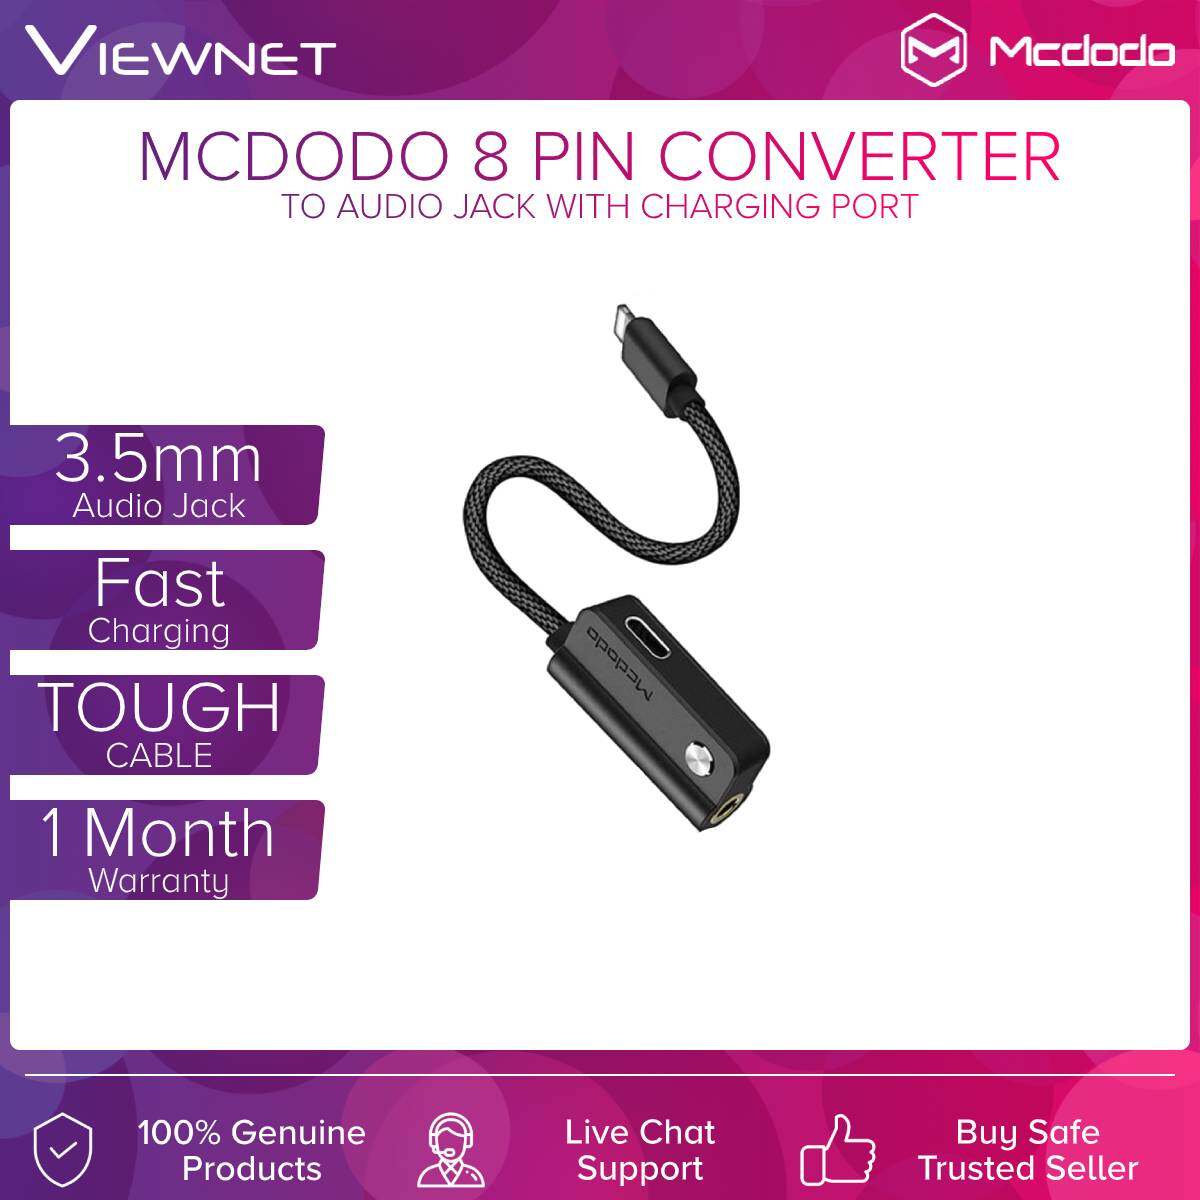 Mcdodo 8 Pin to DC 3.5mm and 8 Pin Black Convertor Cable (CAB-CA347-1)